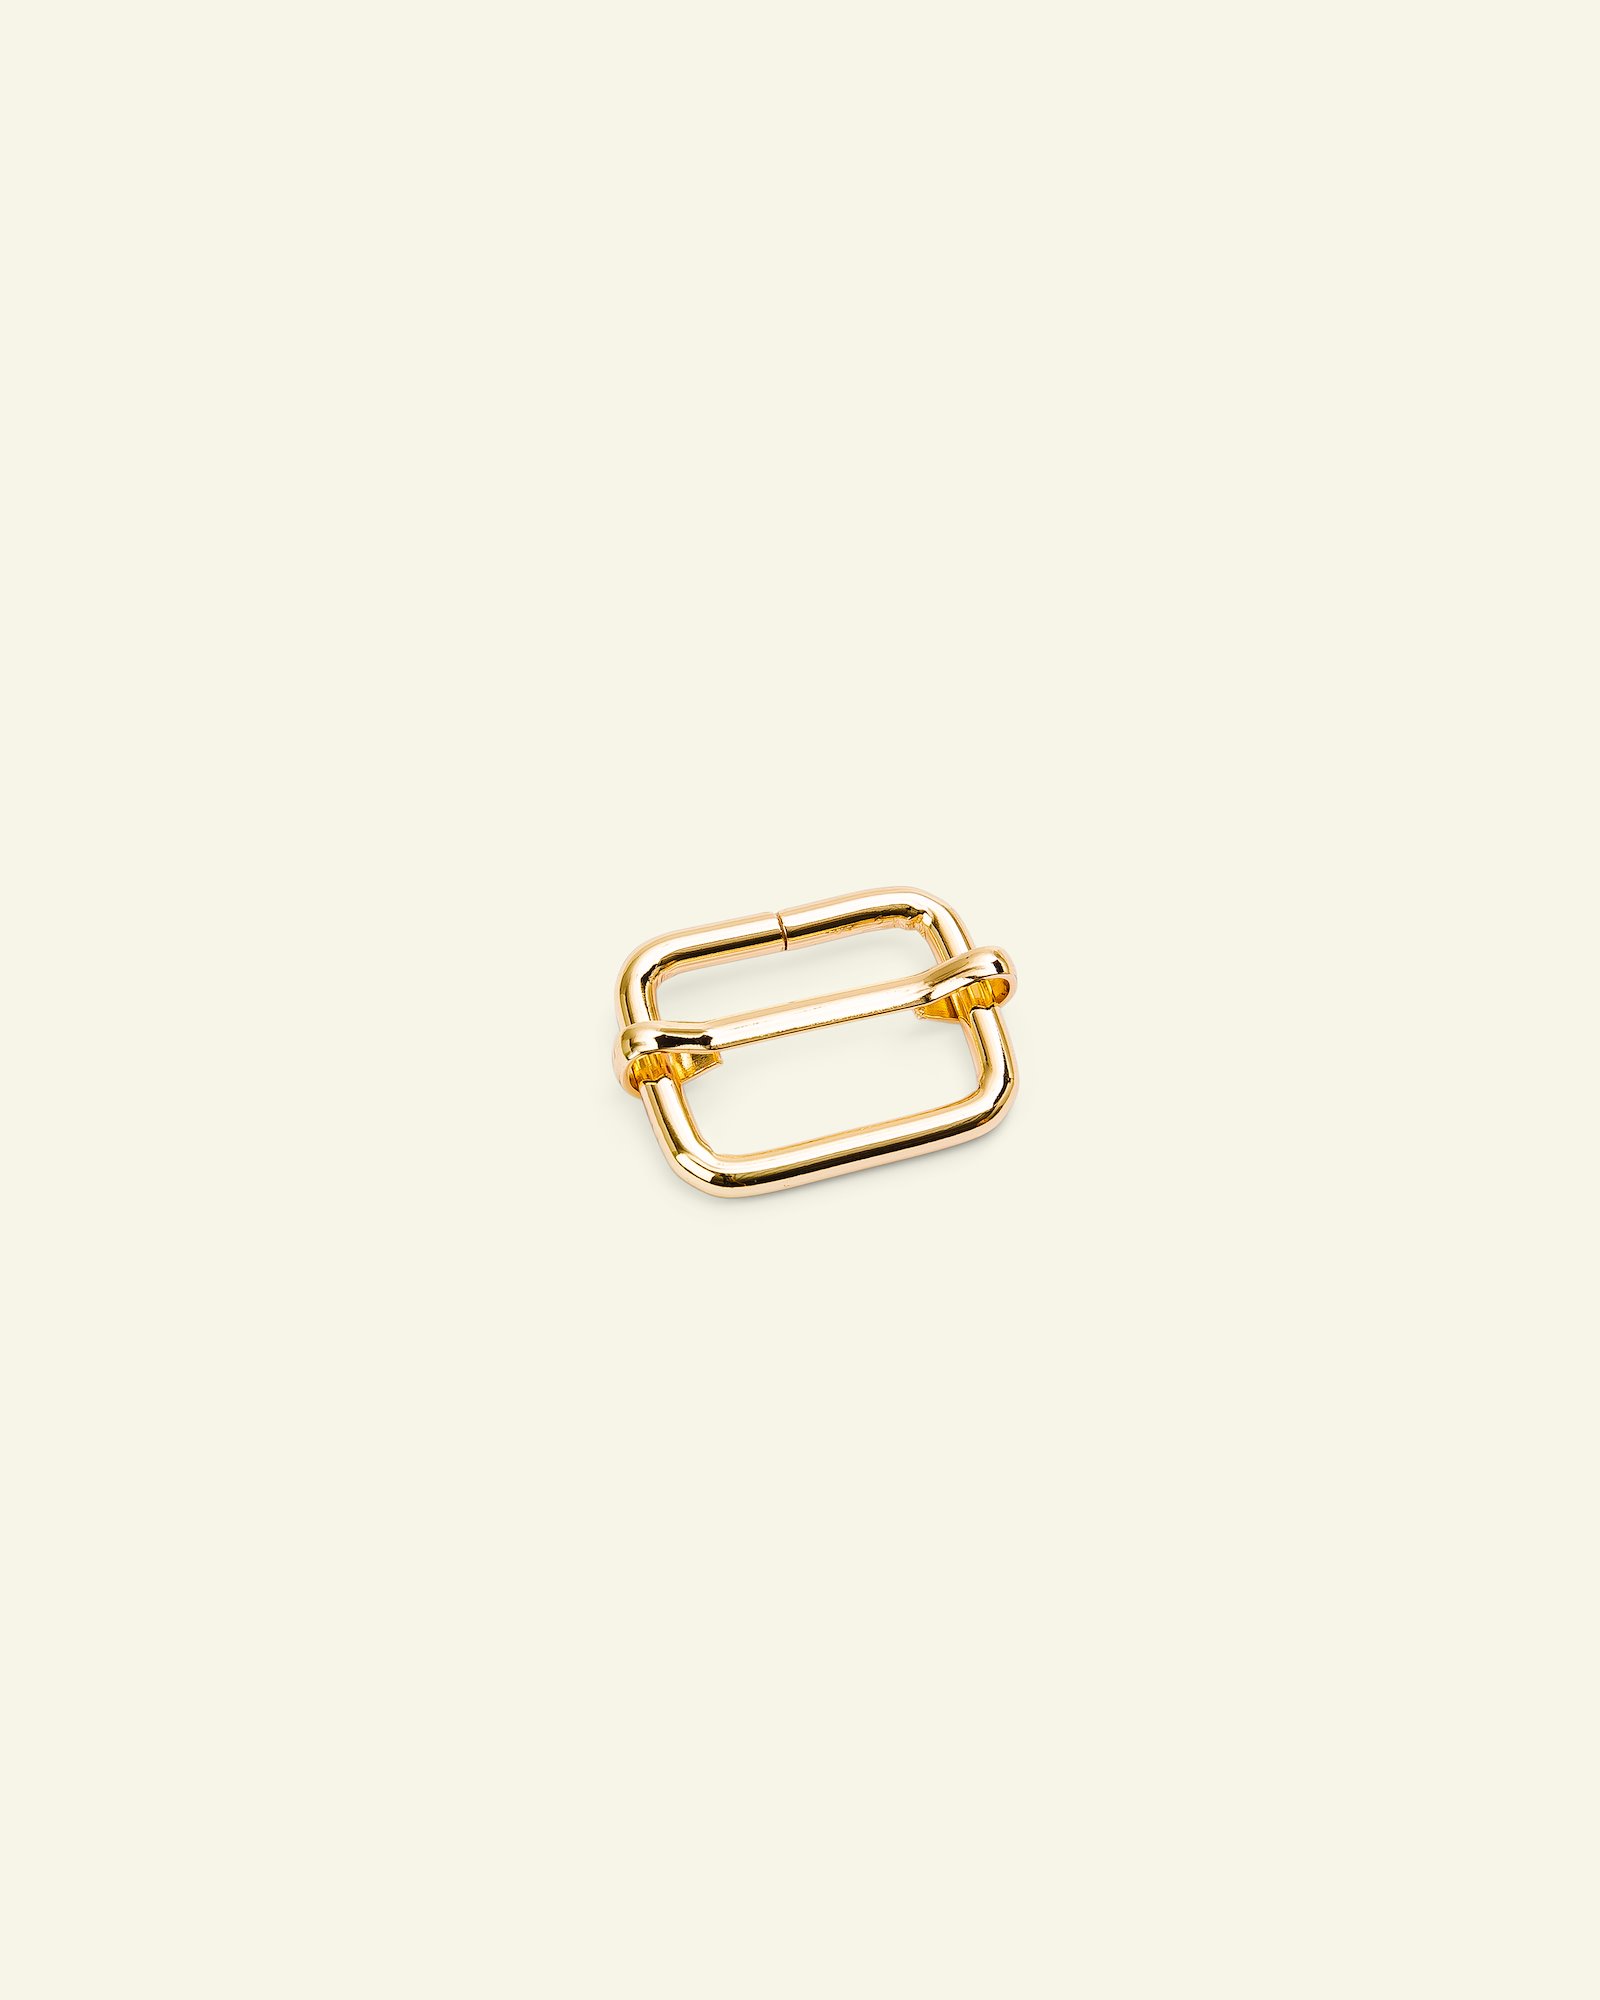 Buckle metal 25mm gold colored 1 pcs 45107_pack